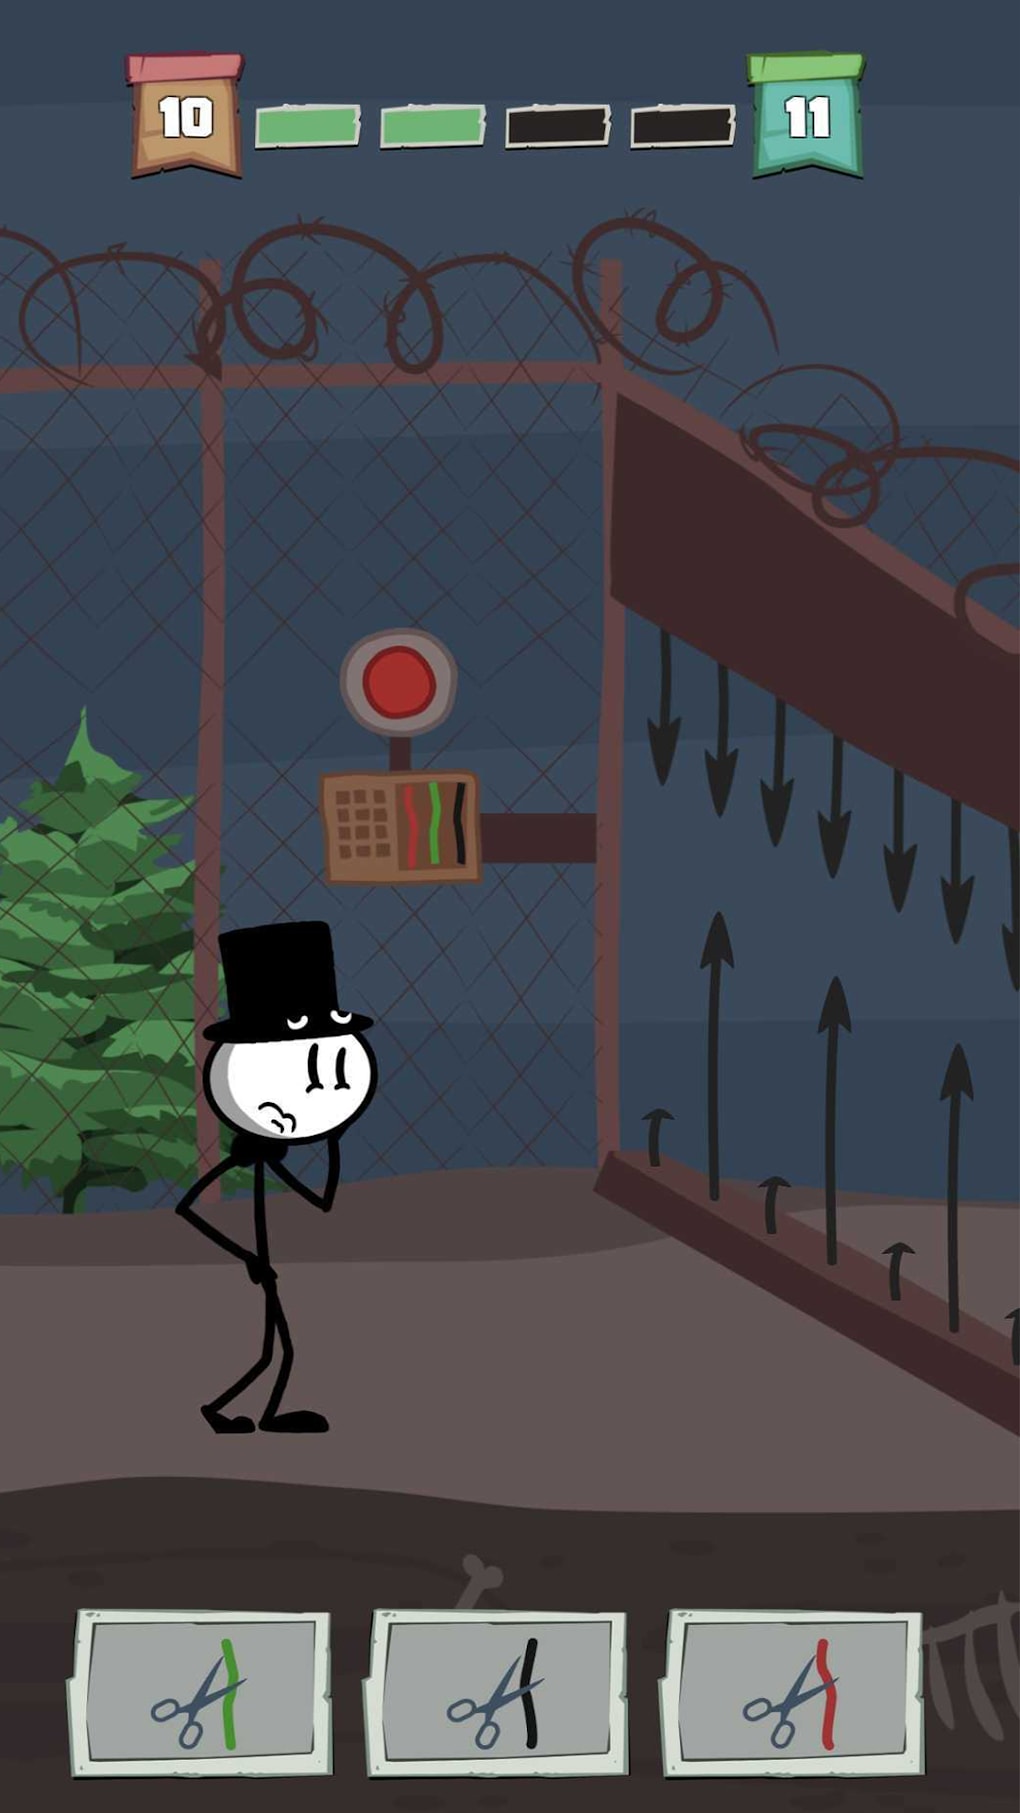 Prison Escape: Stickman Story - Apps To Play